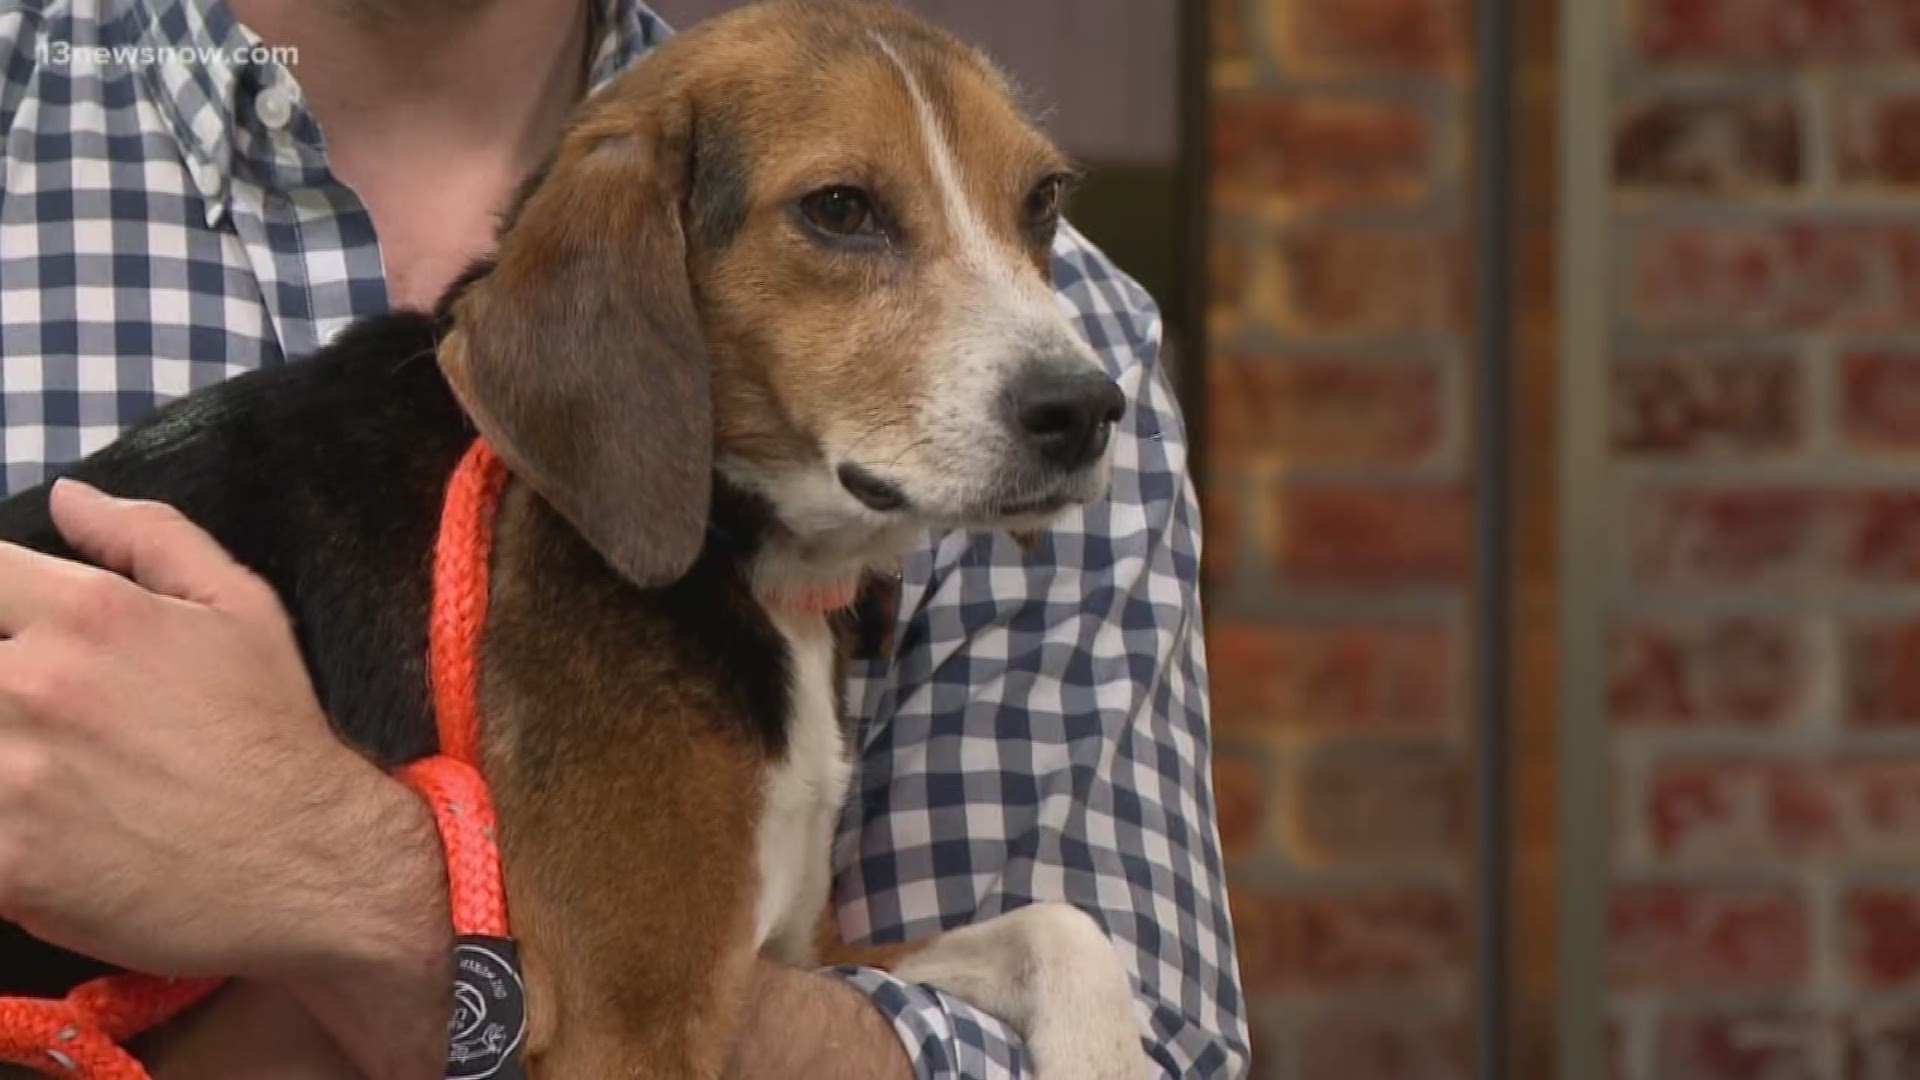 John Wayne, a two-year-old Beagle mix, is looking for his forever home.